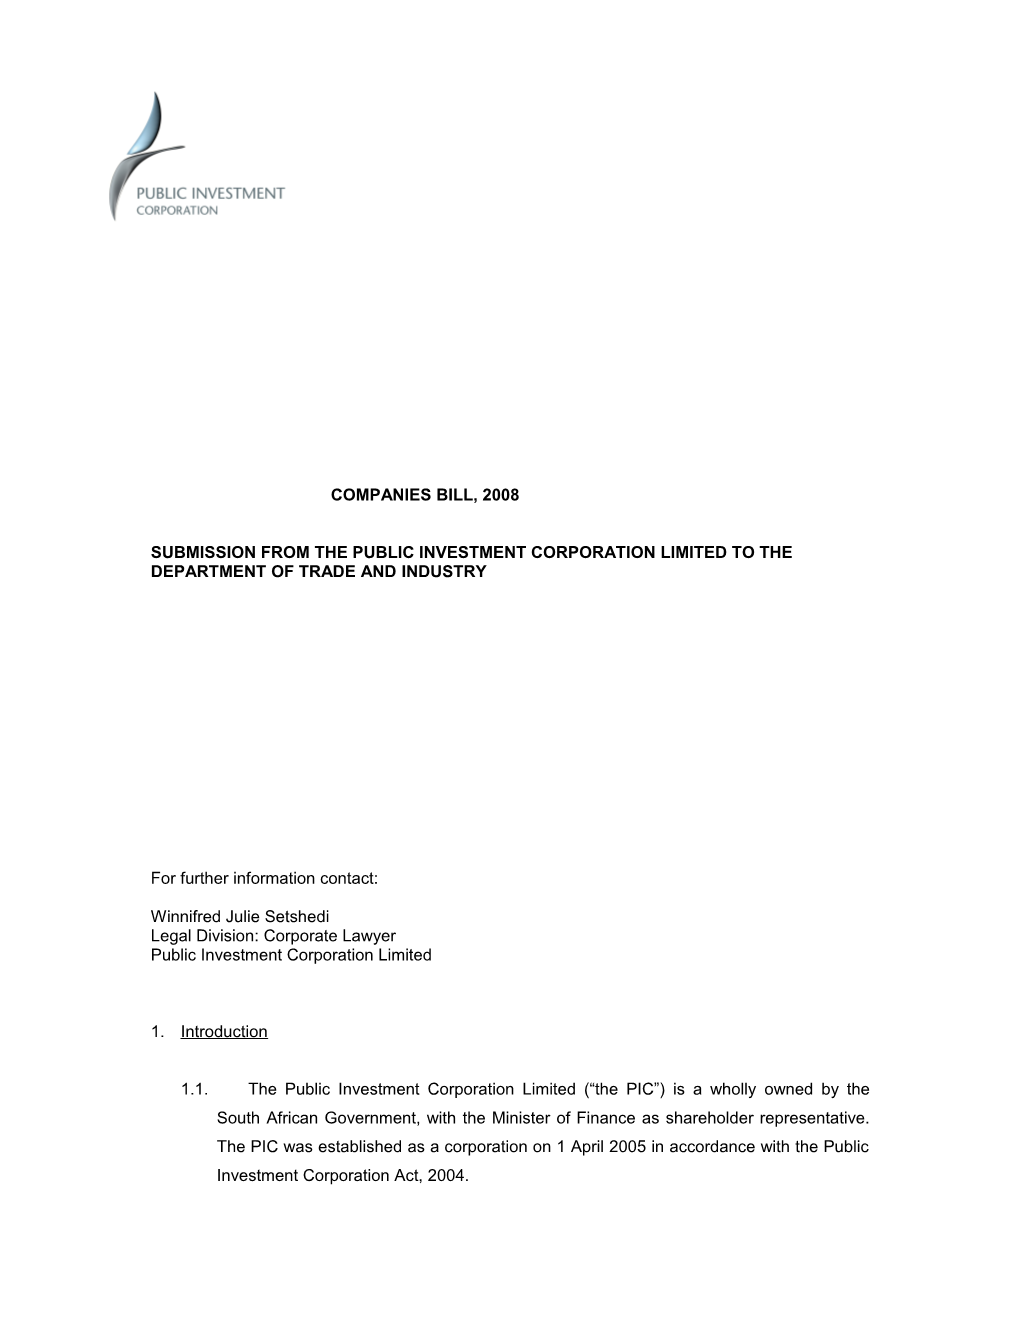 Submission from the Public Investment Corporation Limited to the Department of Trade And